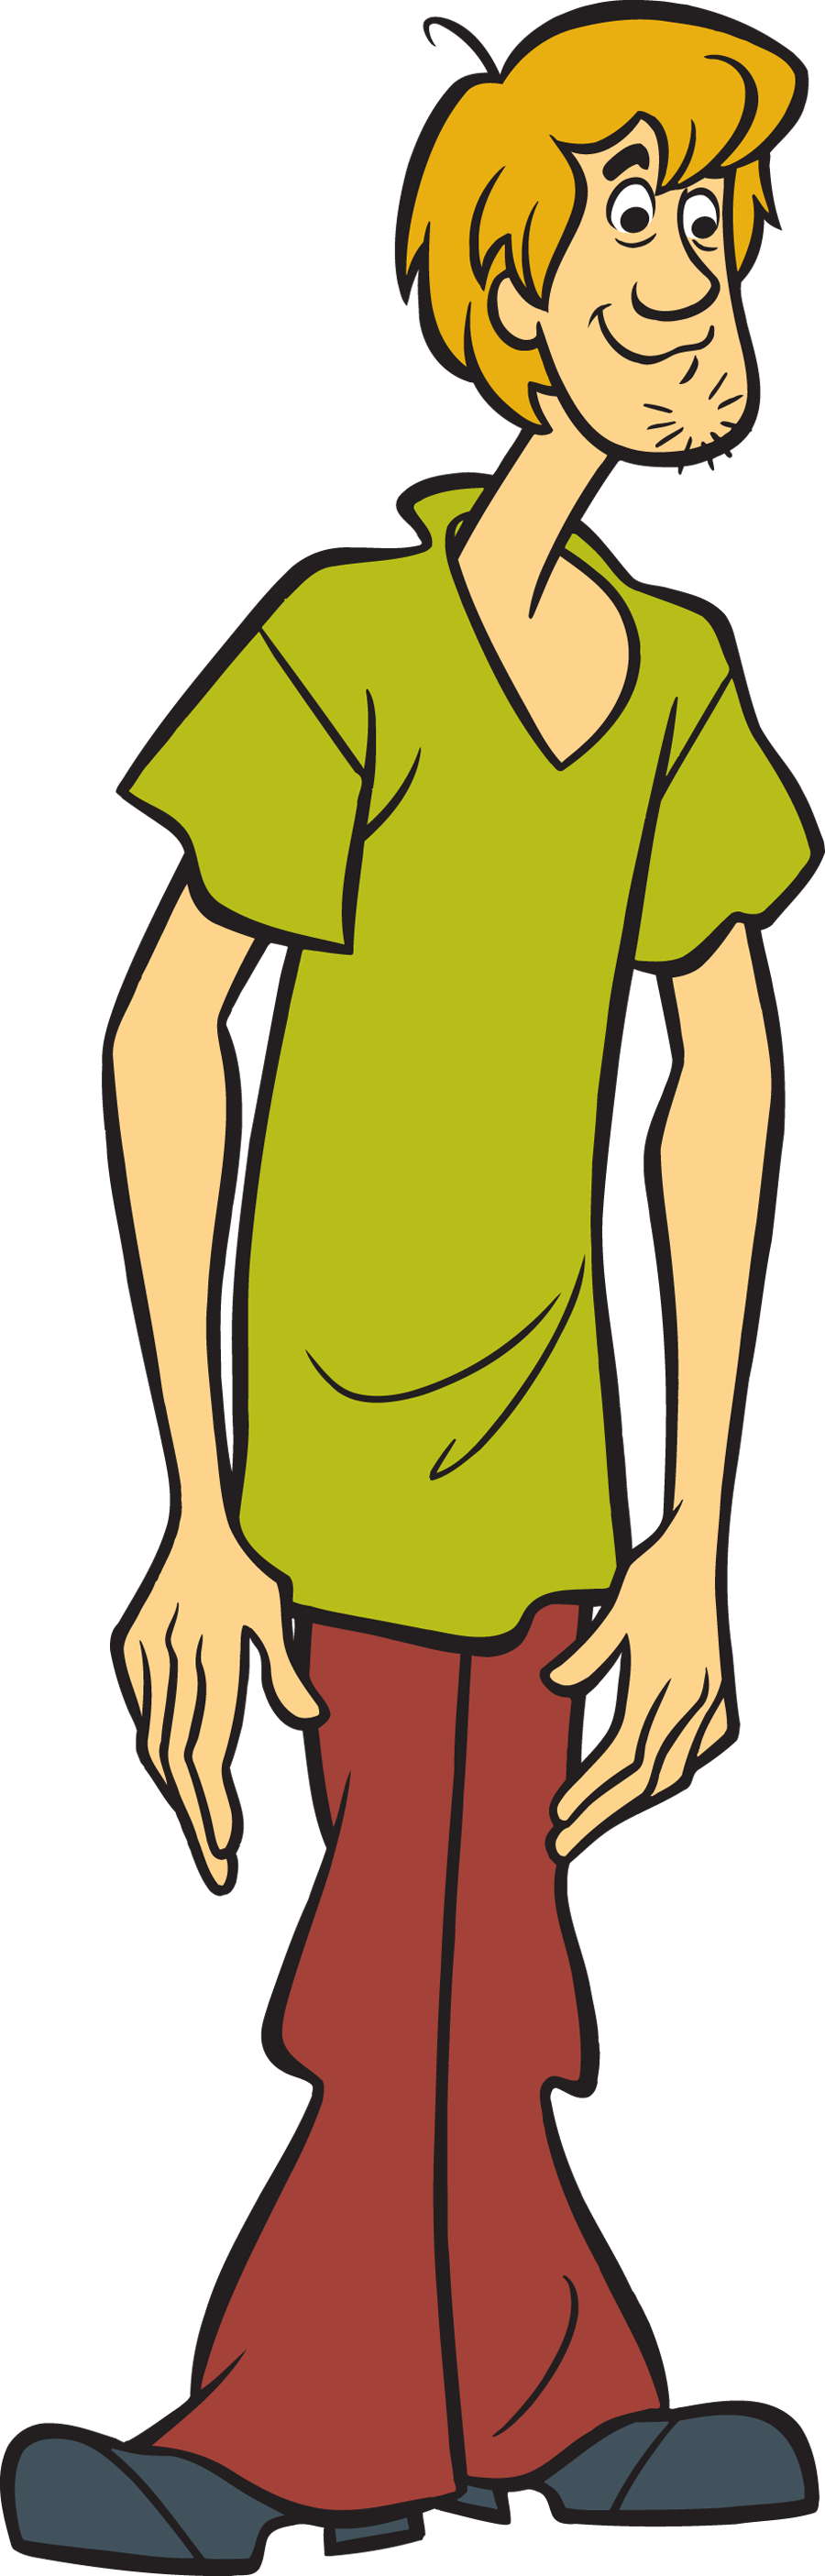 Scooby doo clipart scared, Scooby doo scared Transparent FREE for